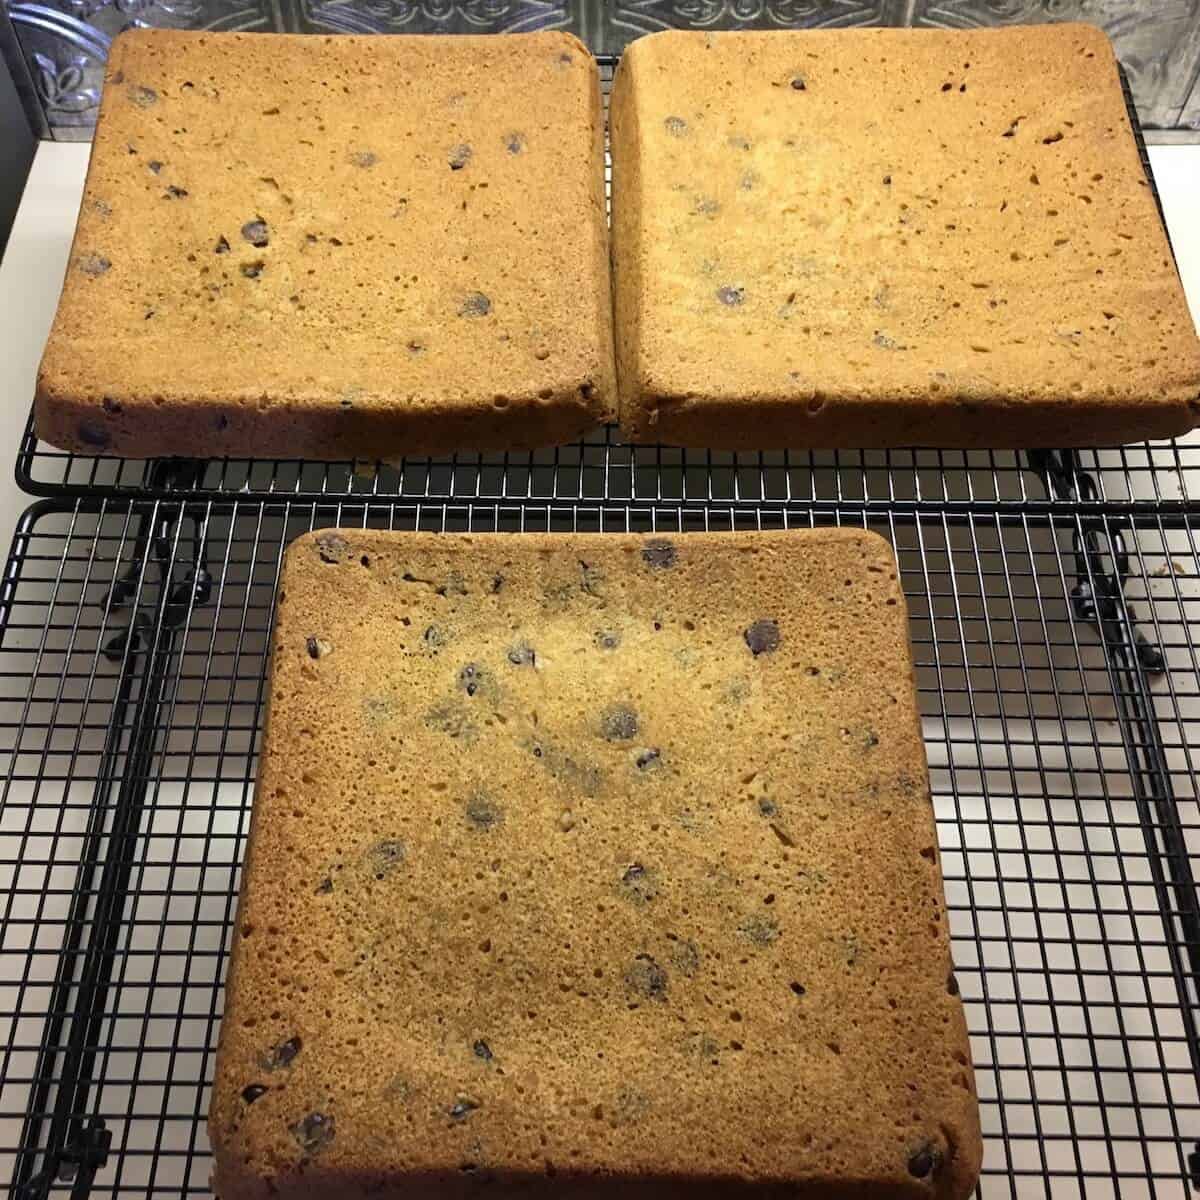 Baked chocolate chip cookie cake layers cooling on a rack.